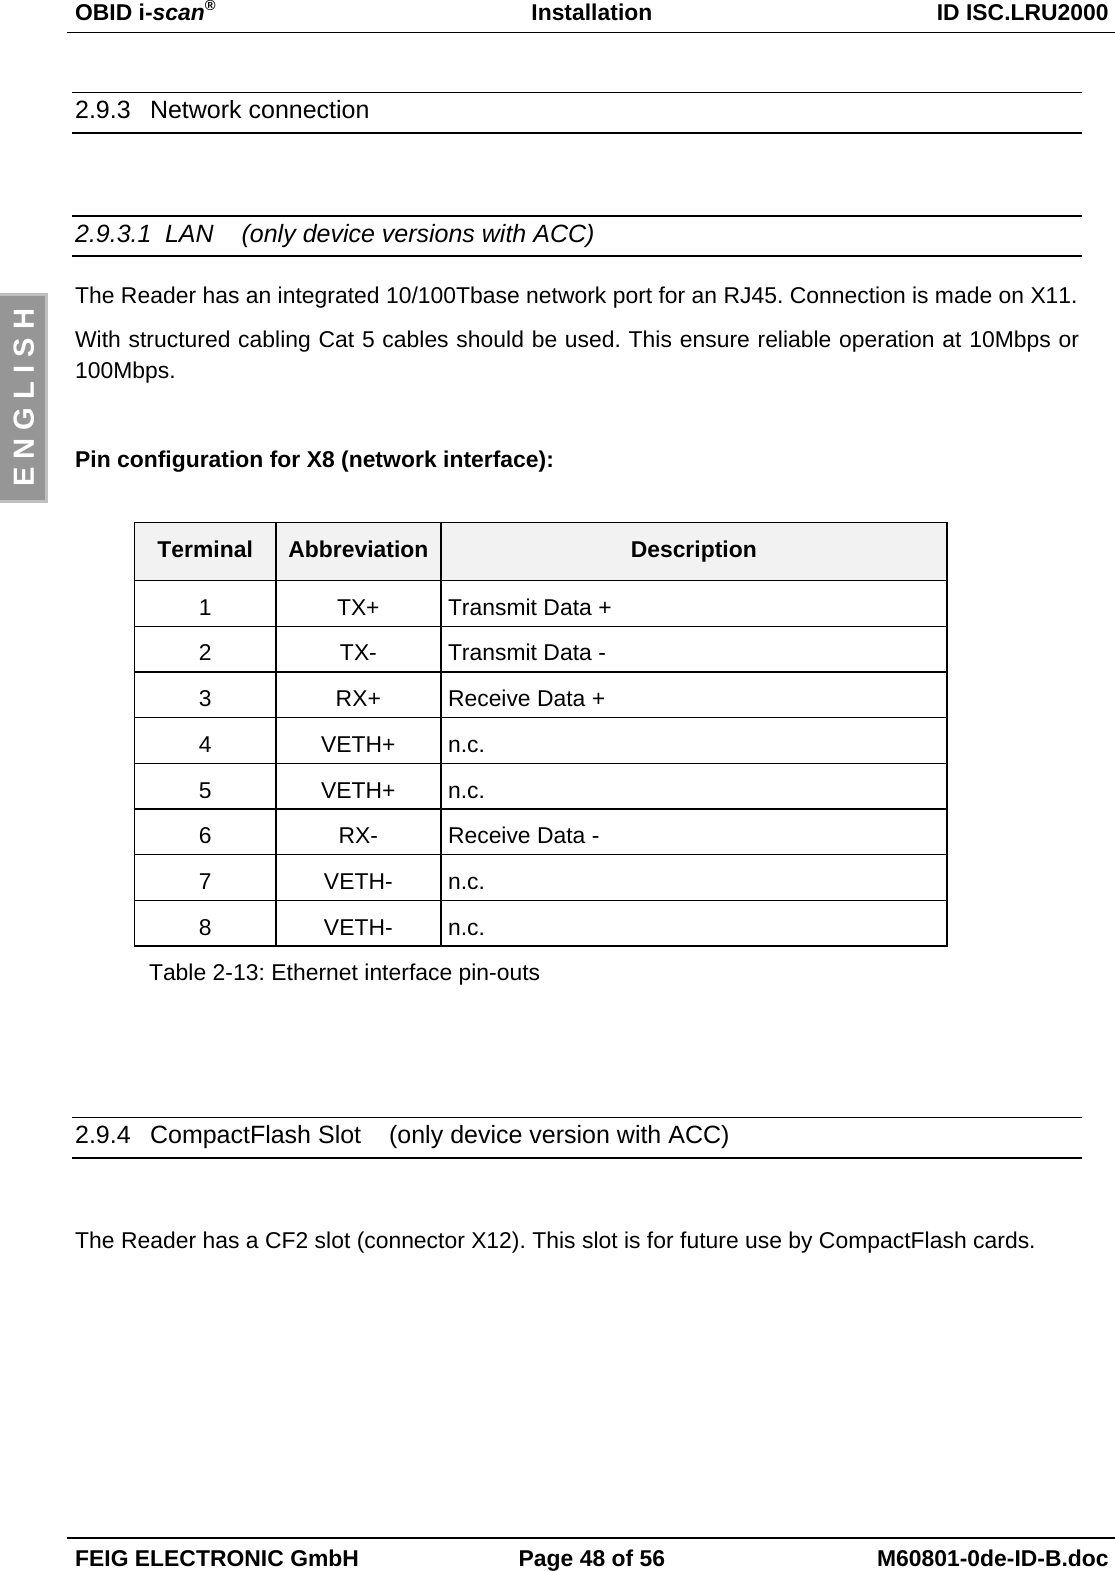 OBID i-scan®Installation ID ISC.LRU2000FEIG ELECTRONIC GmbH Page 48 of 56 M60801-0de-ID-B.docE N G L I S H2.9.3 Network connection2.9.3.1  LAN    (only device versions with ACC)The Reader has an integrated 10/100Tbase network port for an RJ45. Connection is made on X11.With structured cabling Cat 5 cables should be used. This ensure reliable operation at 10Mbps or100Mbps.Pin configuration for X8 (network interface):Terminal Abbreviation Description1 TX+ Transmit Data +2 TX- Transmit Data -3 RX+ Receive Data +4 VETH+ n.c.5 VETH+ n.c.6 RX- Receive Data -7 VETH- n.c.8 VETH- n.c.Table 2-13: Ethernet interface pin-outs2.9.4  CompactFlash Slot    (only device version with ACC)The Reader has a CF2 slot (connector X12). This slot is for future use by CompactFlash cards.